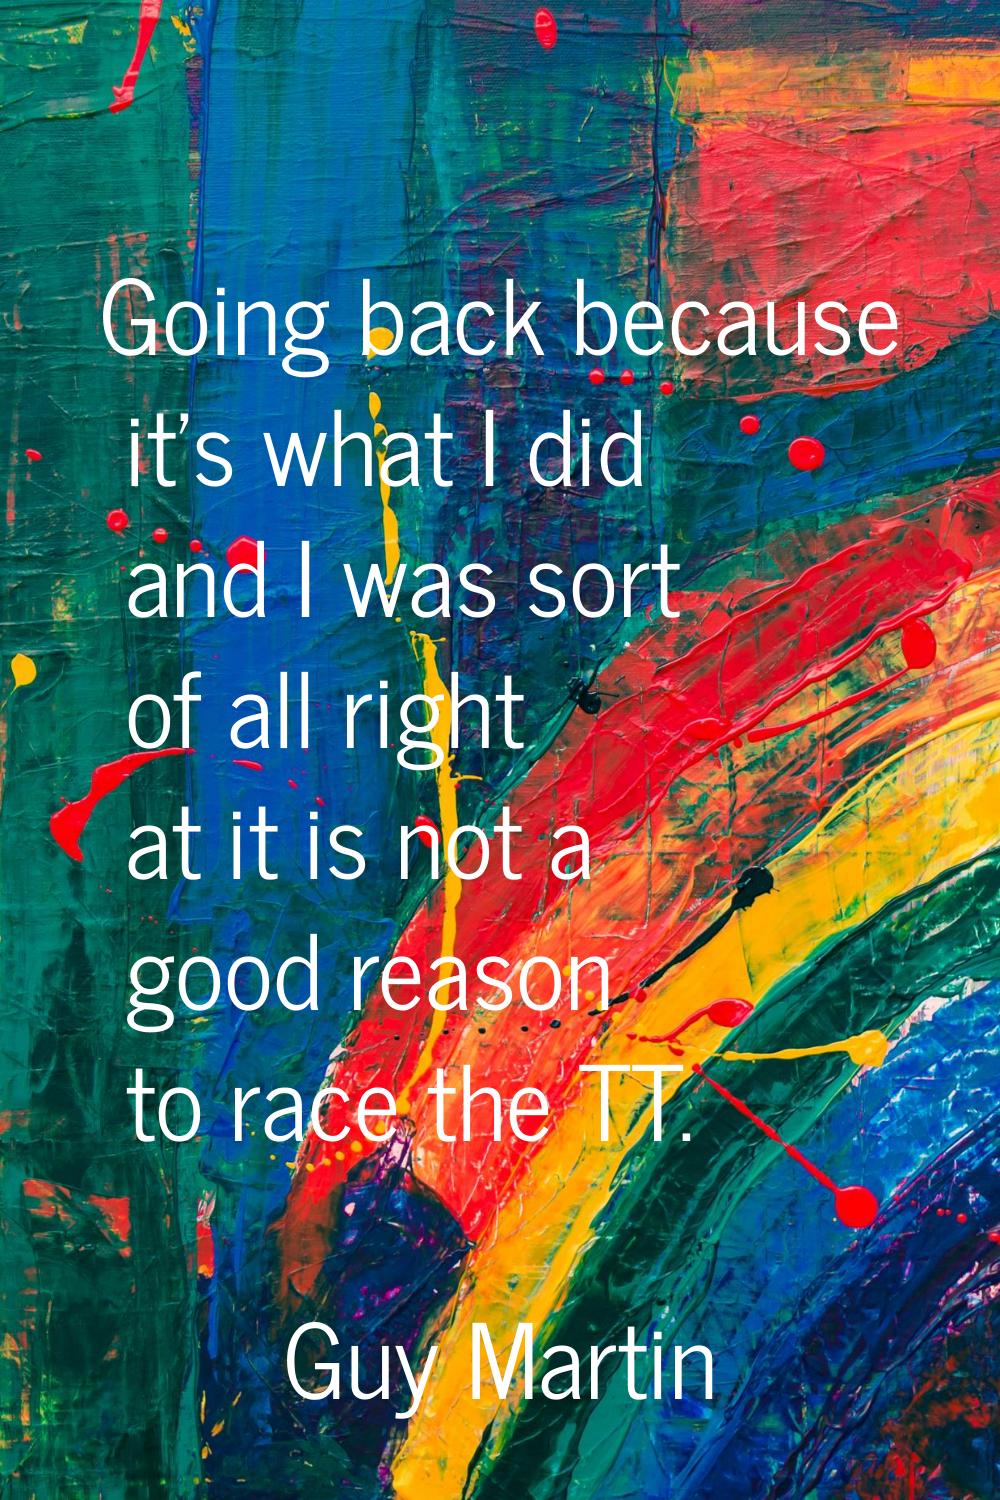 Going back because it's what I did and I was sort of all right at it is not a good reason to race t